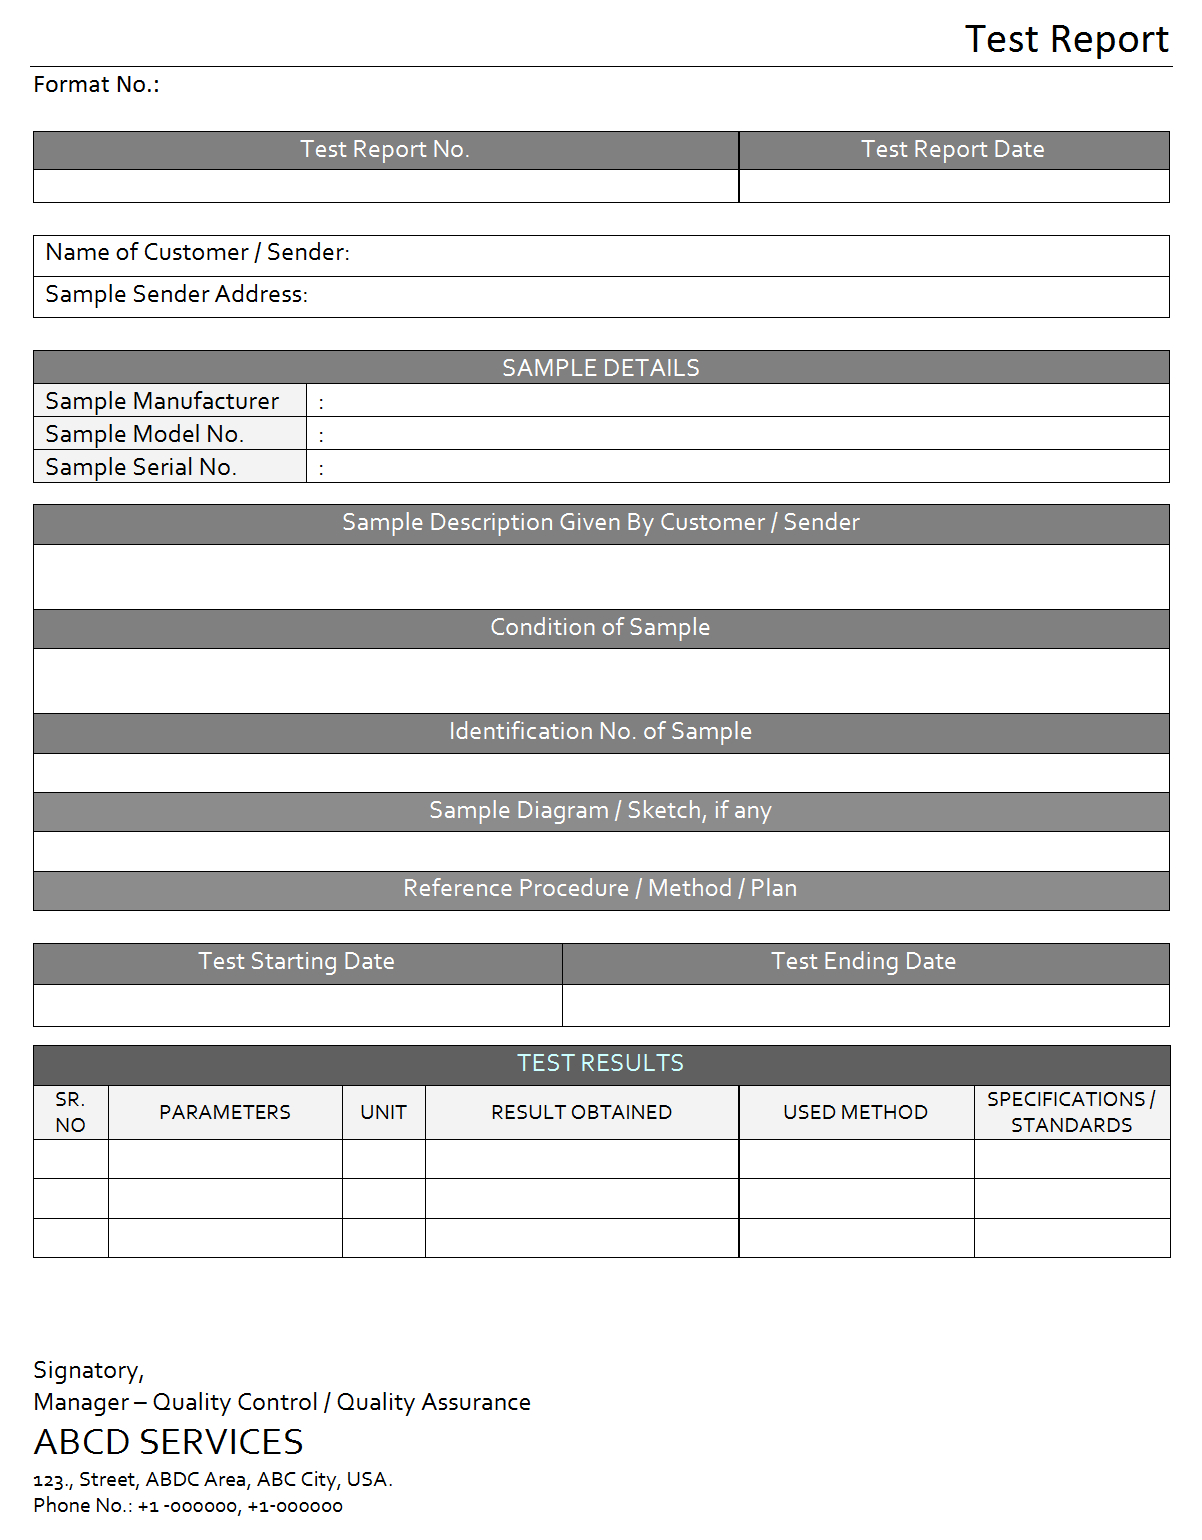 Test Report For Laboratory – With Test Result Report Template